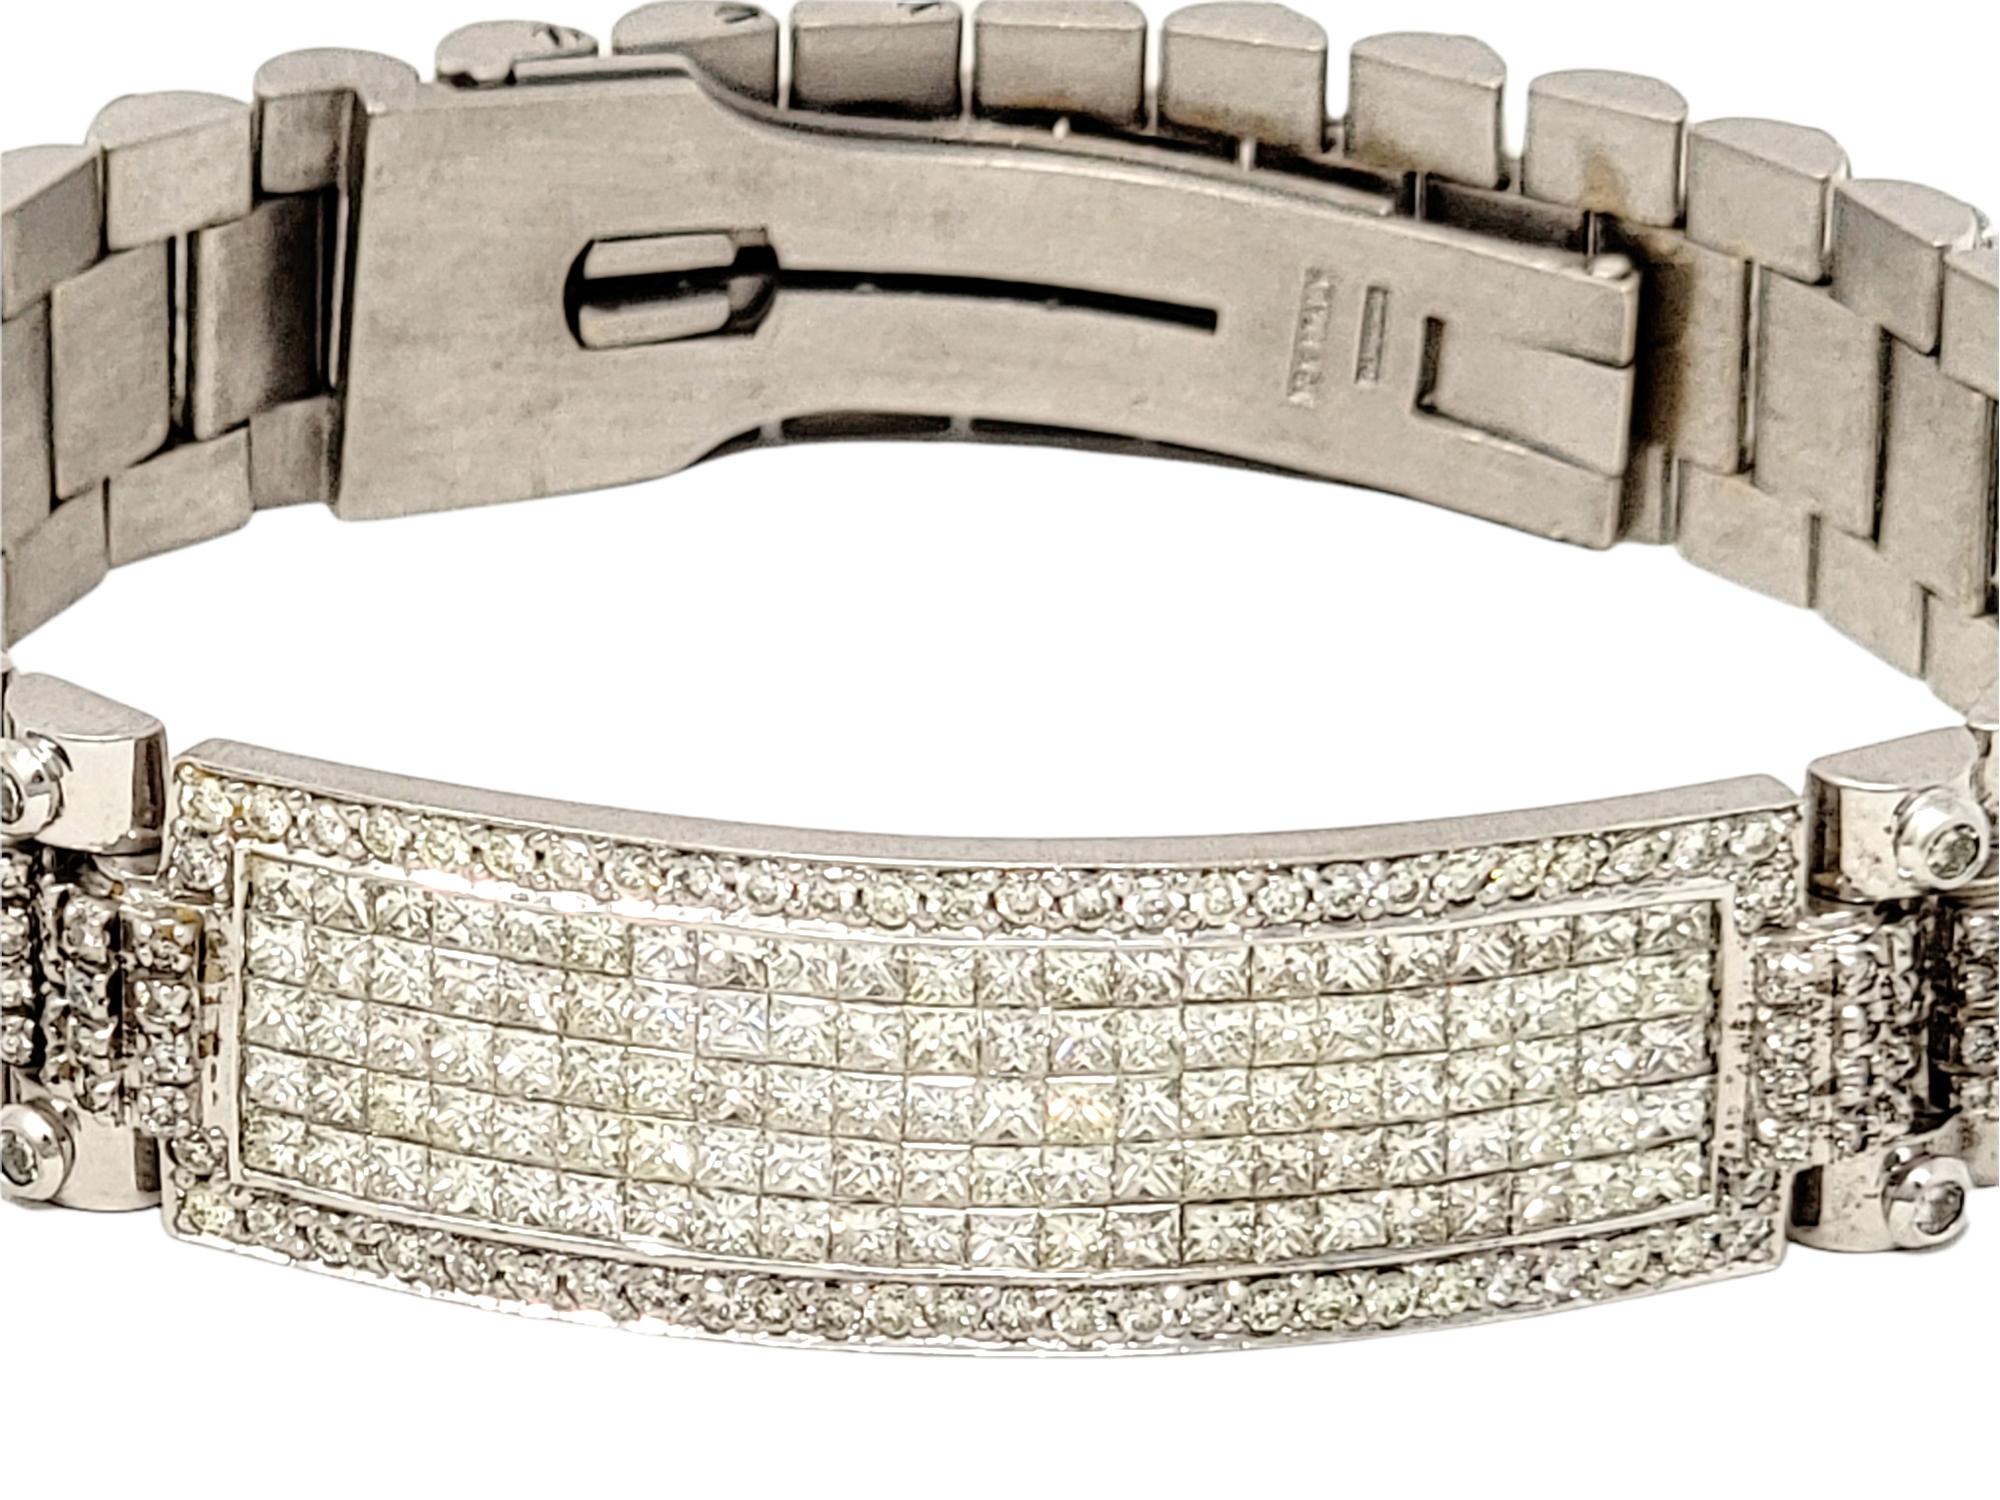 This striking mens diamond and 18 karat white gold watch link bracelet makes a bold and extravagant statement. The contemporary design of this gorgeous piece looks handsome on the wrist, really drawing the viewers attention to the nearly 600